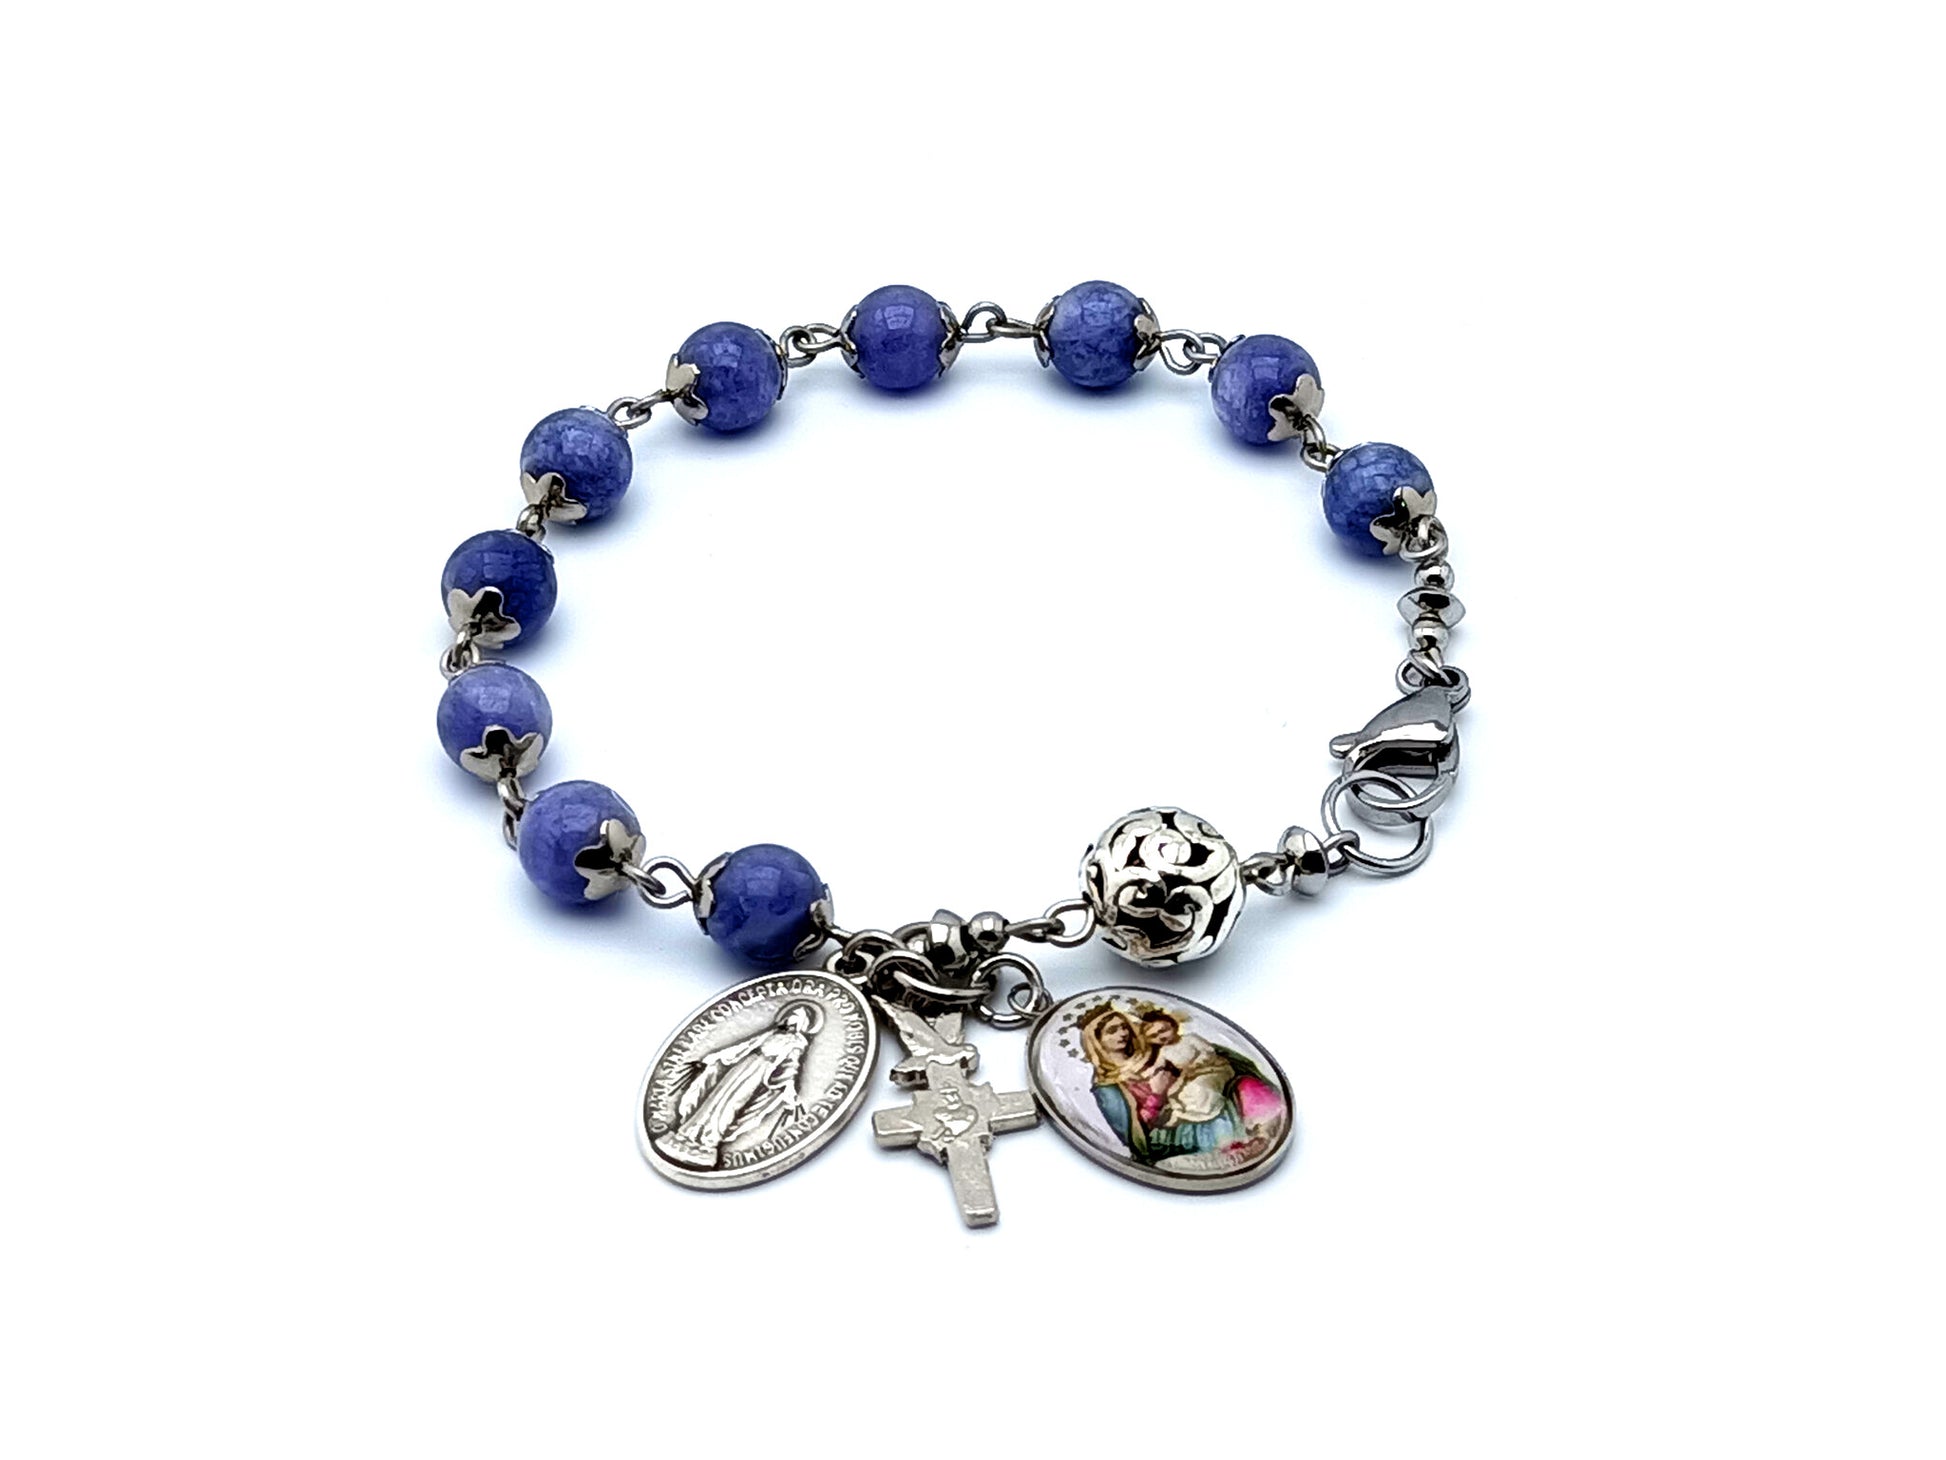 Our Lady of Mount Carmel unique rosary beads single decade rosary bracelet with amethyst and silver beads and miraculous medal.